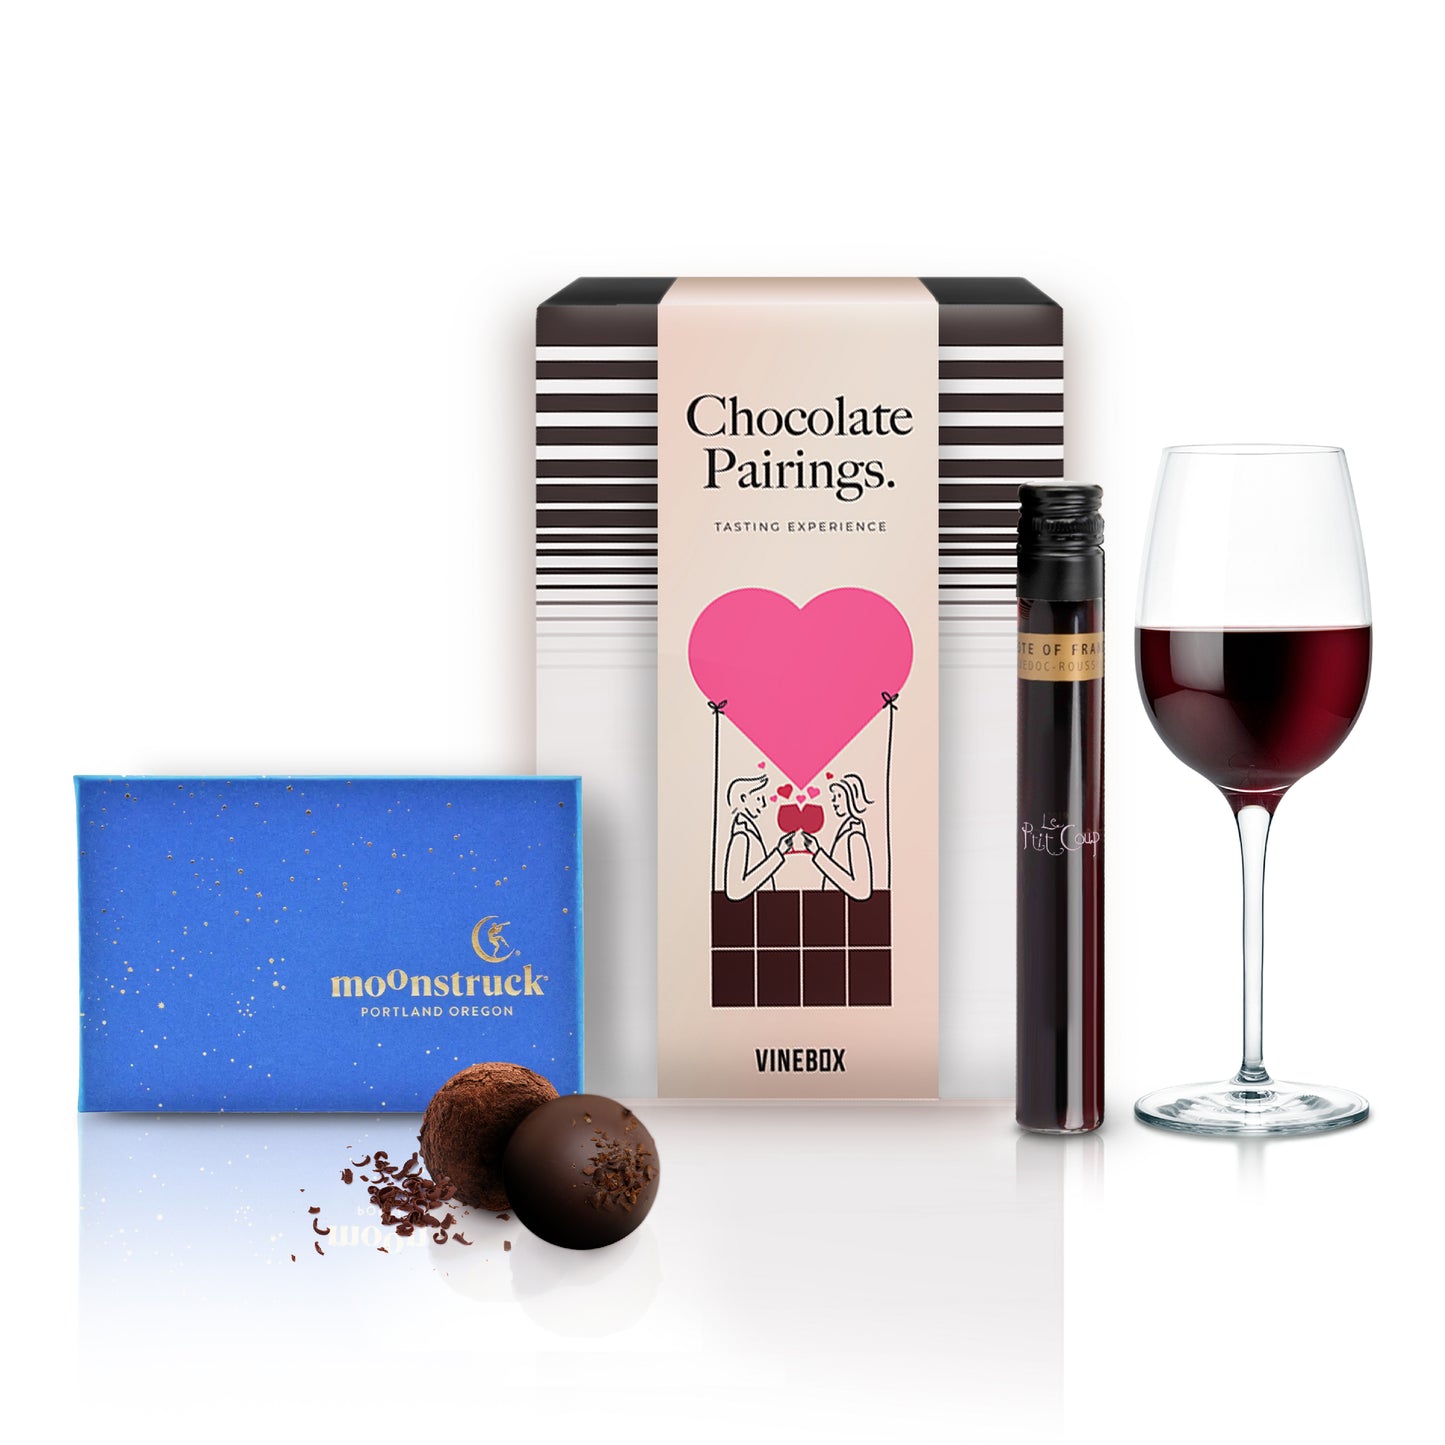 February Box of the Month - Chocolate Pairing